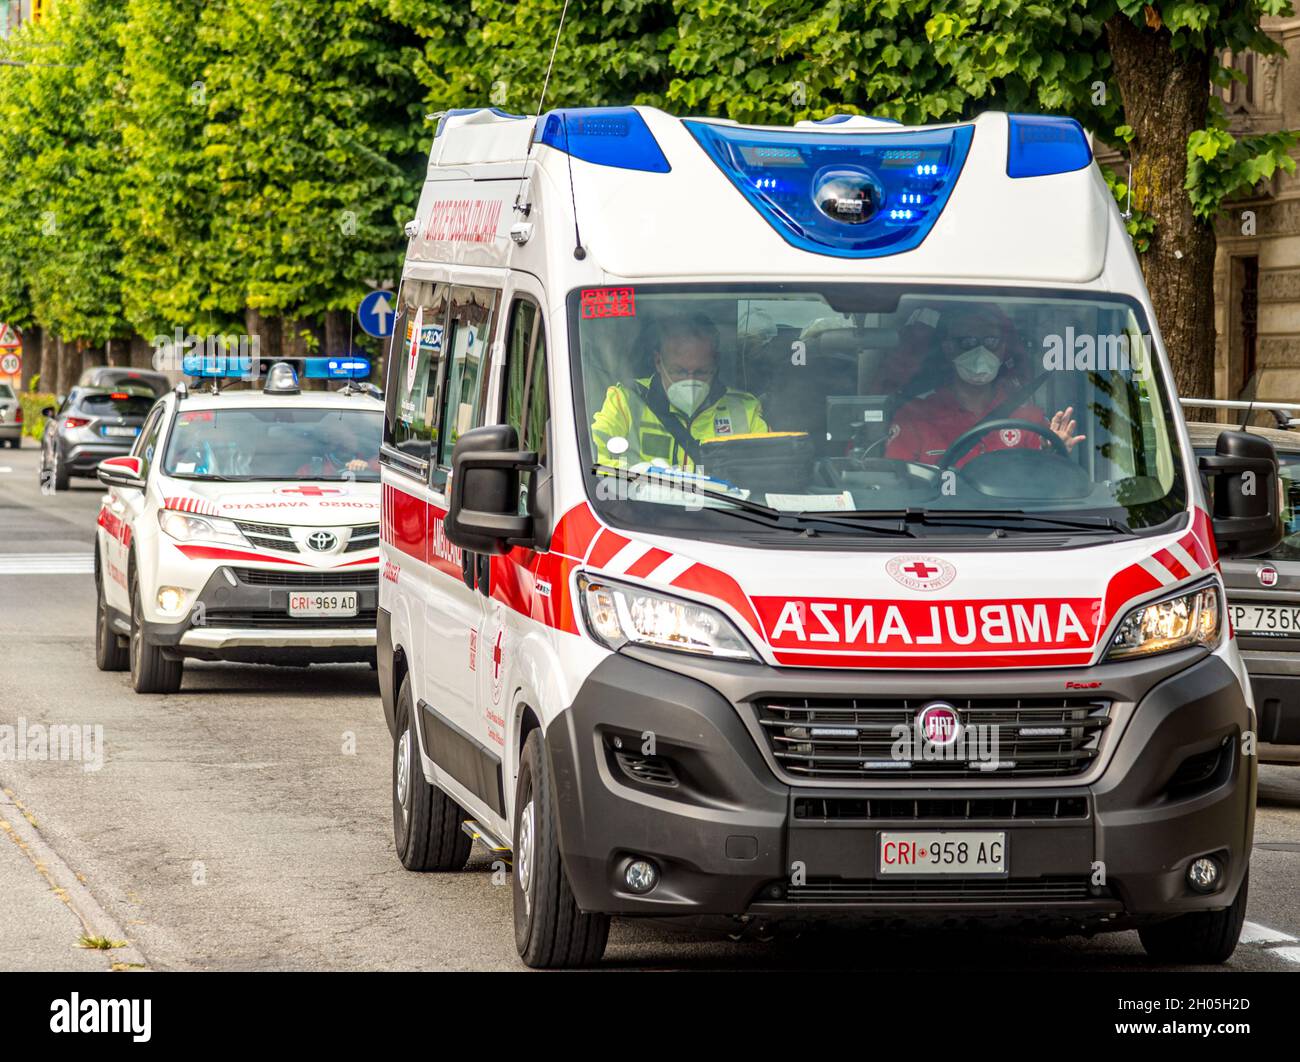 Savigliano, Cuneo, Italy - September 2, 2021: Ambulance of the Italian Red Cross with following car for advanced rescue in first aid Stock Photo